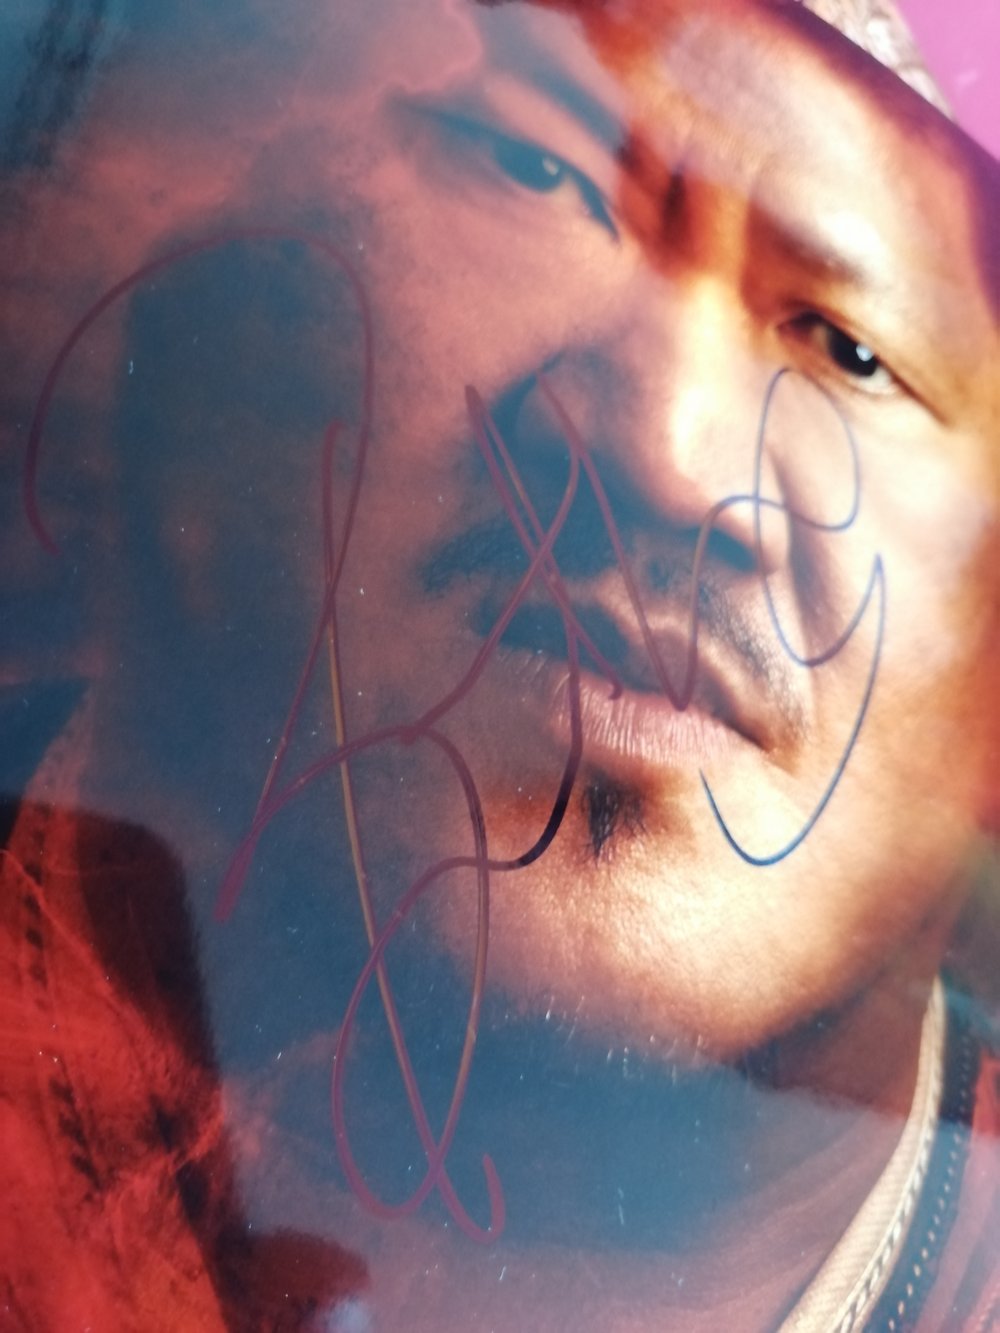 Doctor Strange in the Multiverse of Madness Benedict Wong Signed 